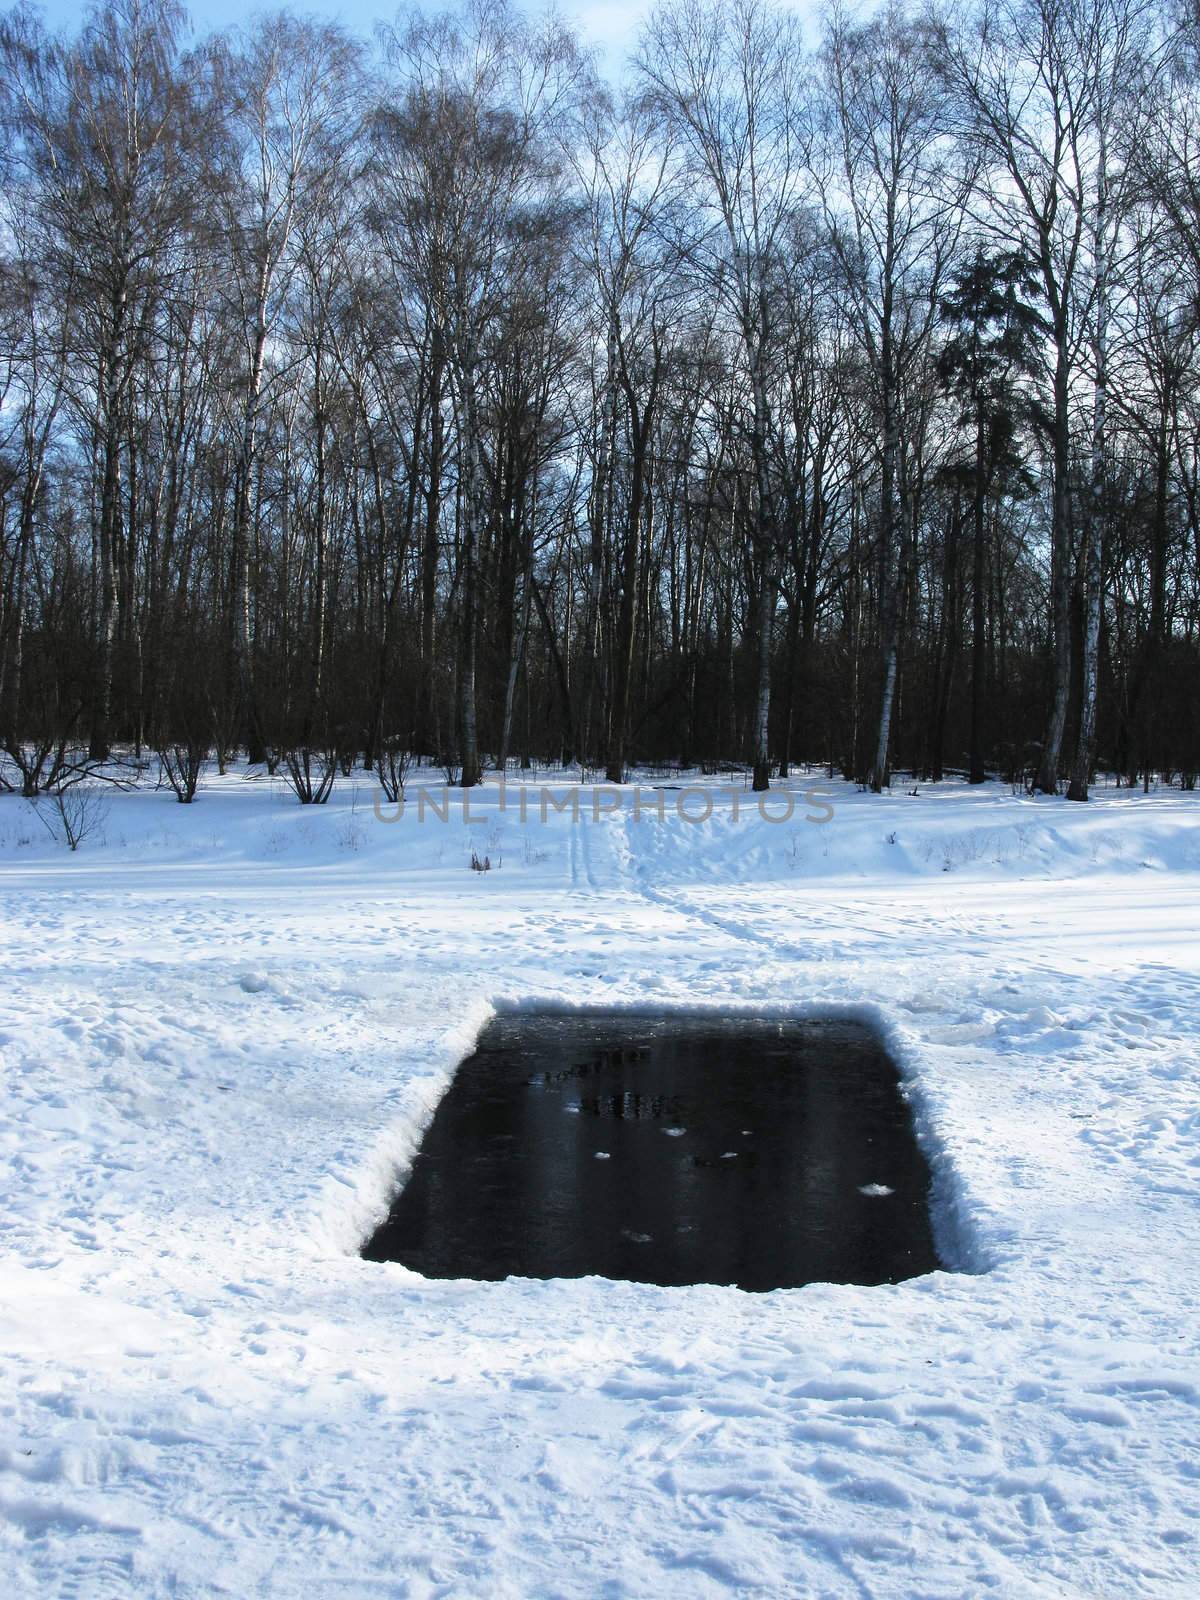 Square ice hole in frozen pond, Moscow winter park